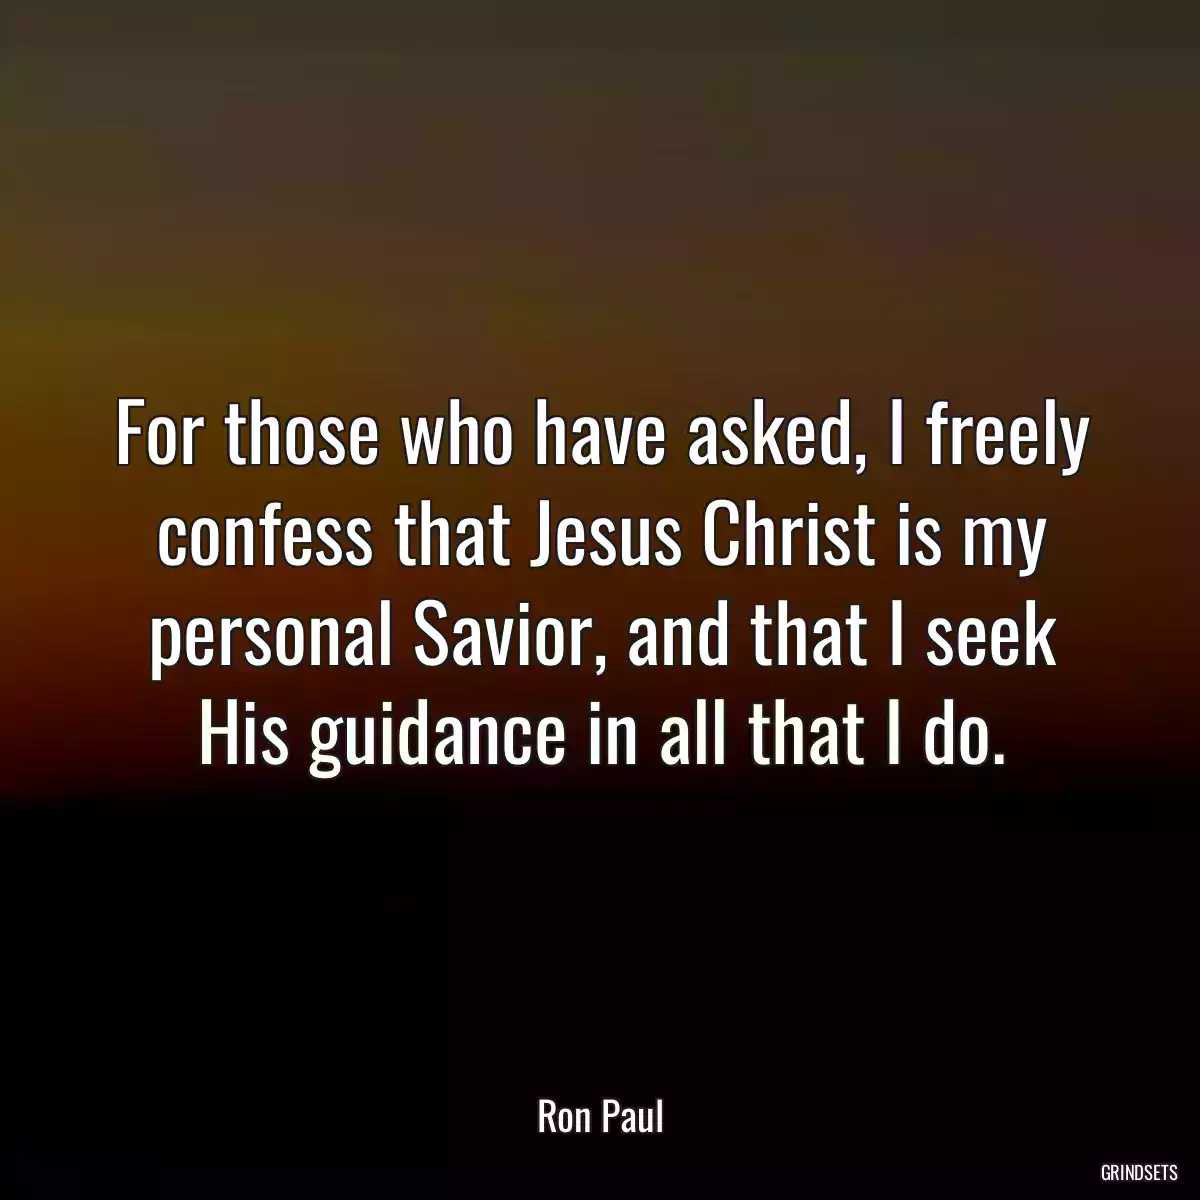 For those who have asked, I freely confess that Jesus Christ is my personal Savior, and that I seek His guidance in all that I do.